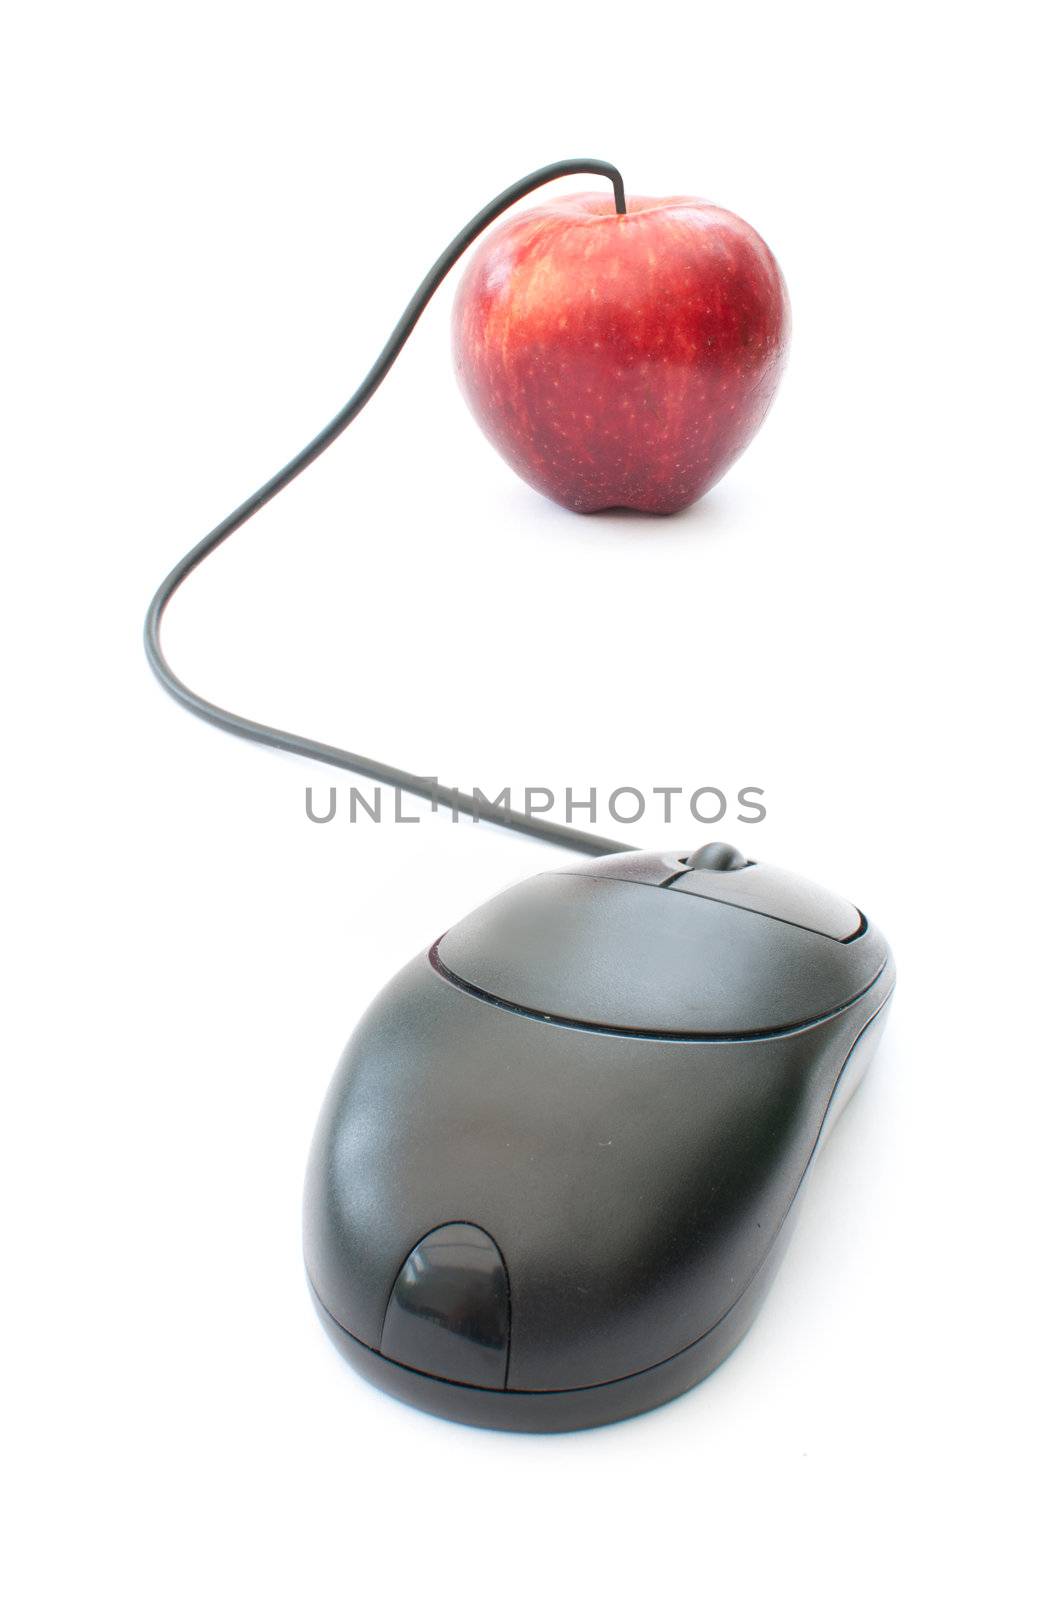 Computer mouse and red apple by unikpix